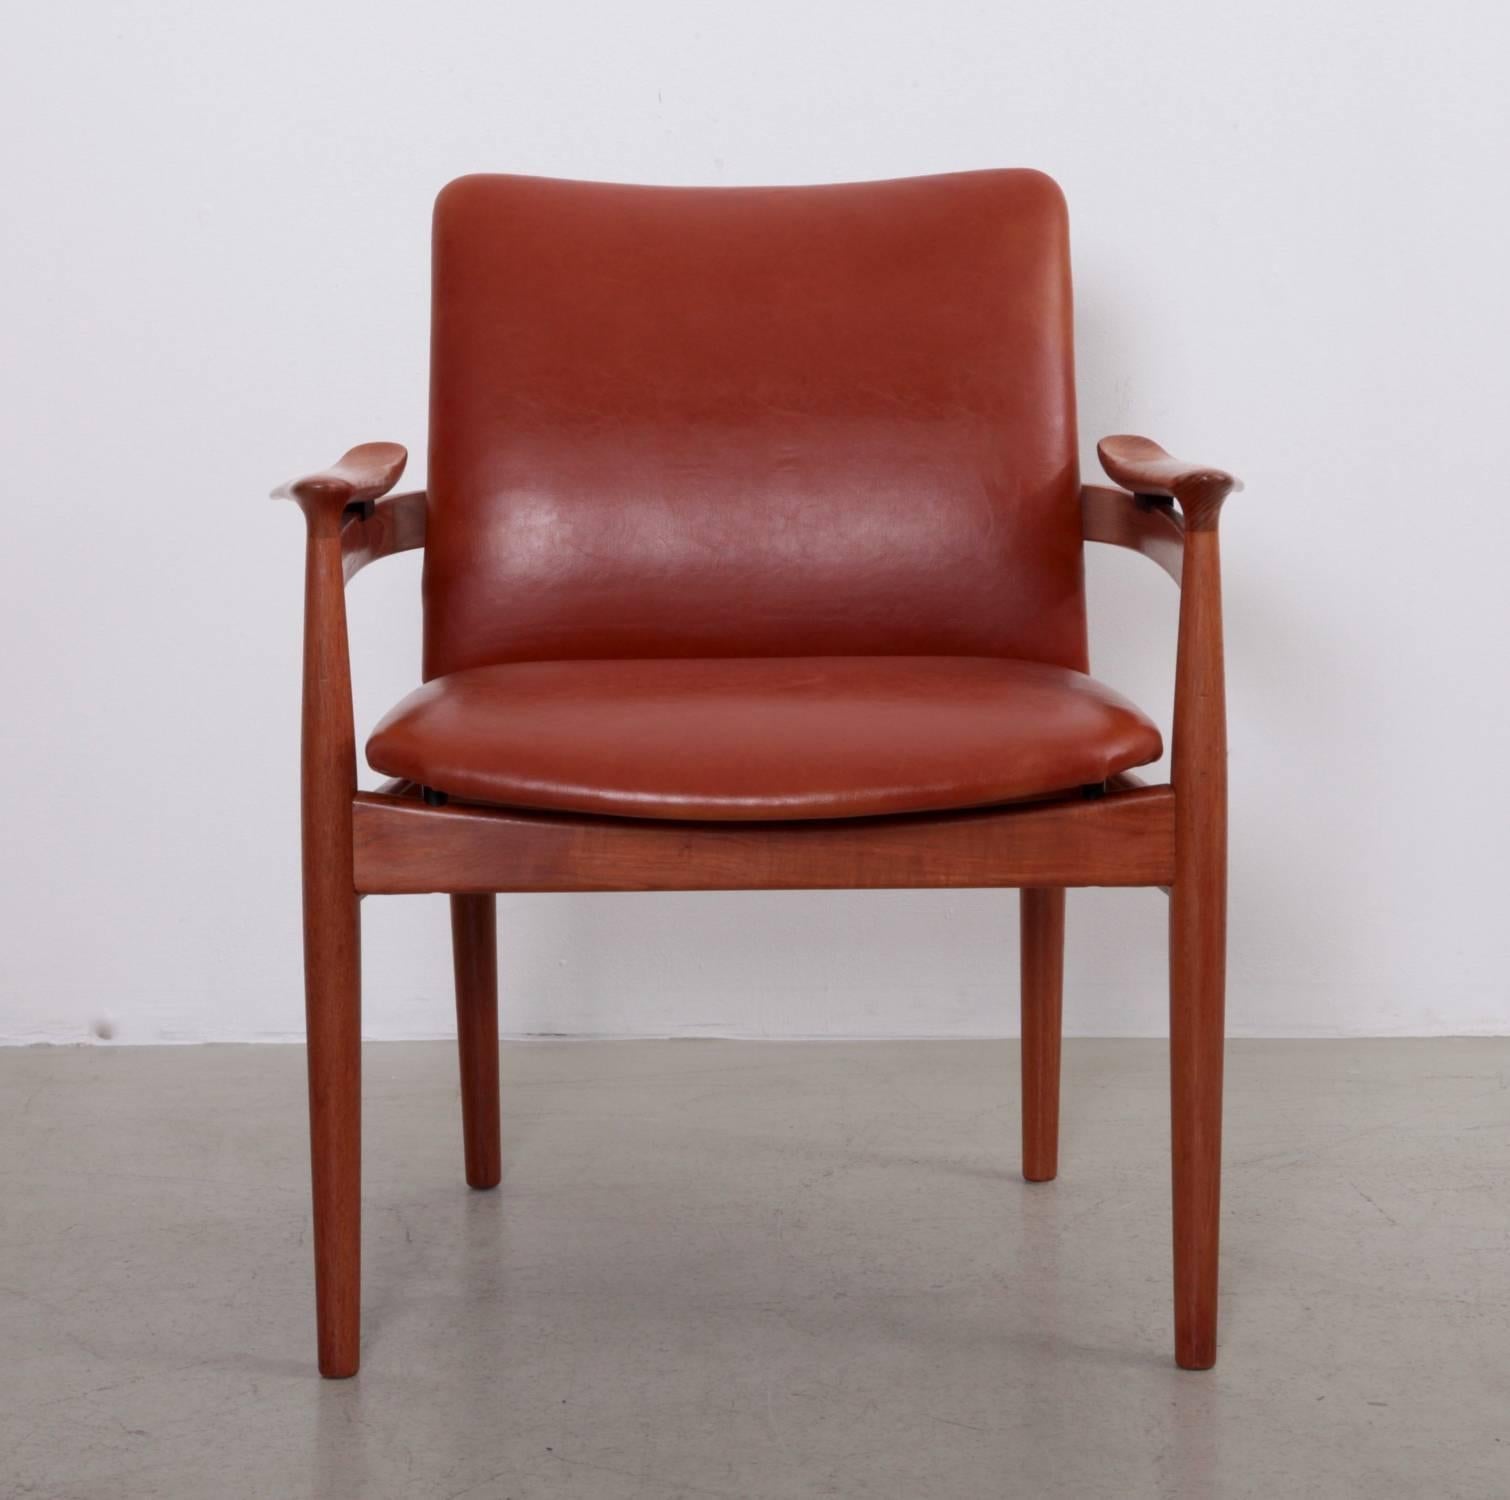 Armchair designed by Finn Juhl for France and Son in 1963, made in Denmark. The armchair comes with a brown-cognac leather and the frame is made of solid teak wood. Labelled on the underside with France & Daverkosen.